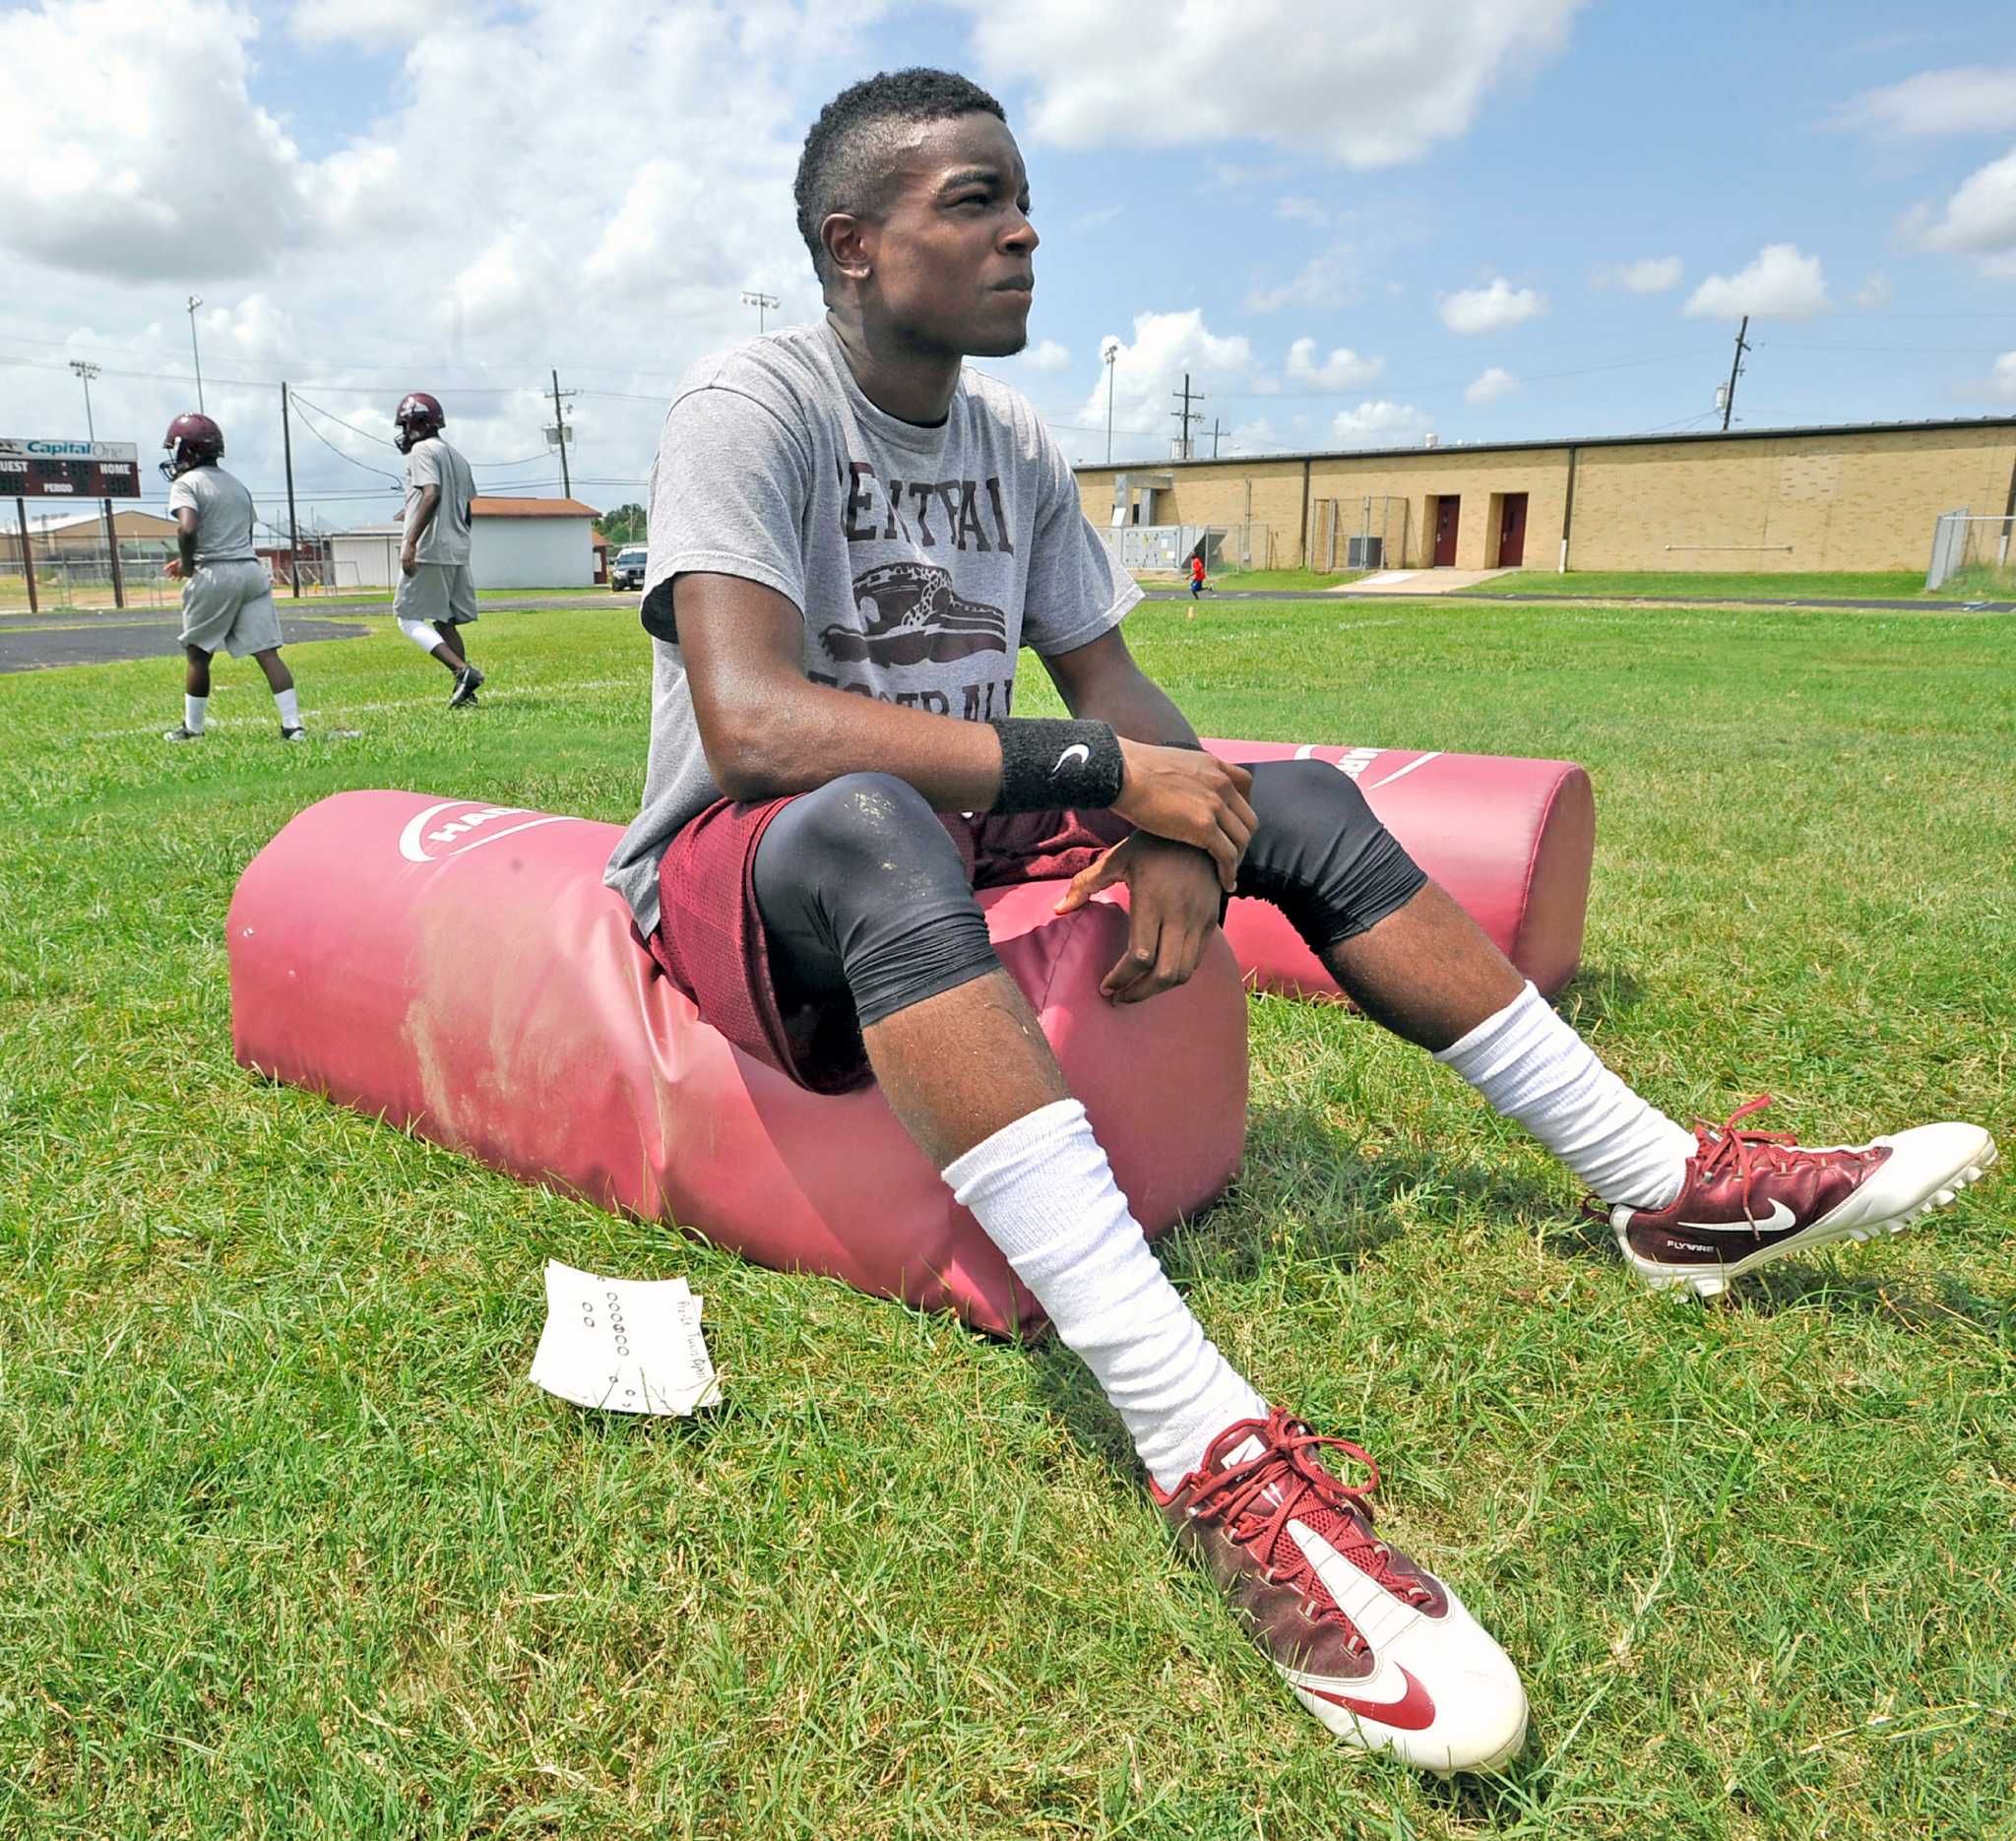 Central's Malbrough commits to Morgan State - Beaumont Enterprise